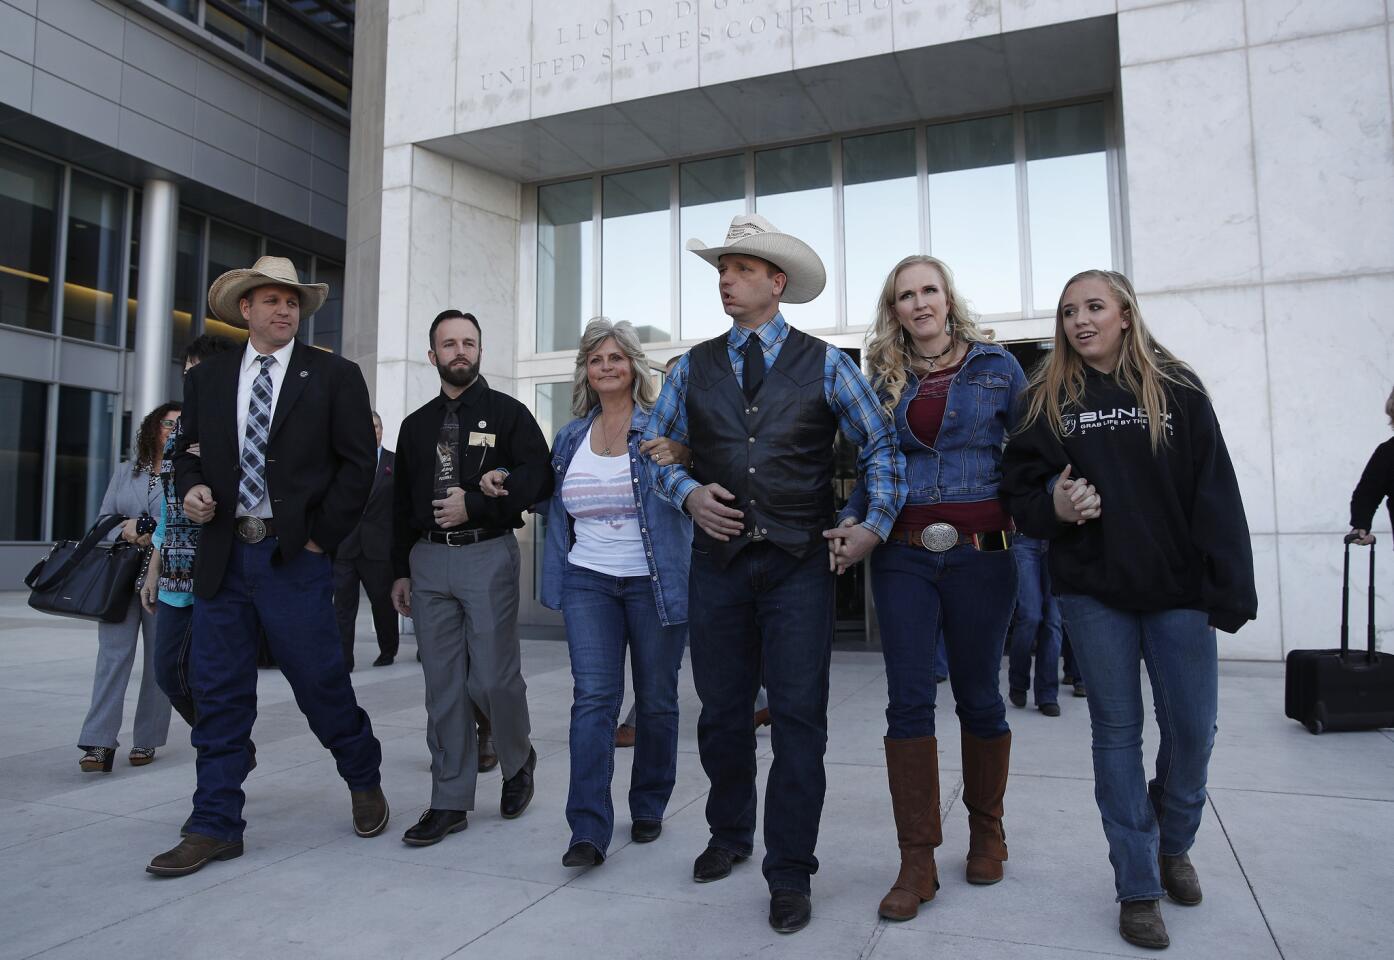 From left, Ammon Bundy, Ryan Payne, Jeanette Finicum, widow of Robert "LaVoy" Finicum, Ryan Bundy, Angela Bundy, wife of Ryan Bundy and Jamie Bundy, daughter of Ryan Bundy, walk out of a federal courthouse in Las Vegas. Chief U.S. District Judge Gloria Navarro declared a mistrial in the case against Cliven Bundy, his sons Ryan and Ammon Bundy and self-styled Montana militia leader Ryan Payne.